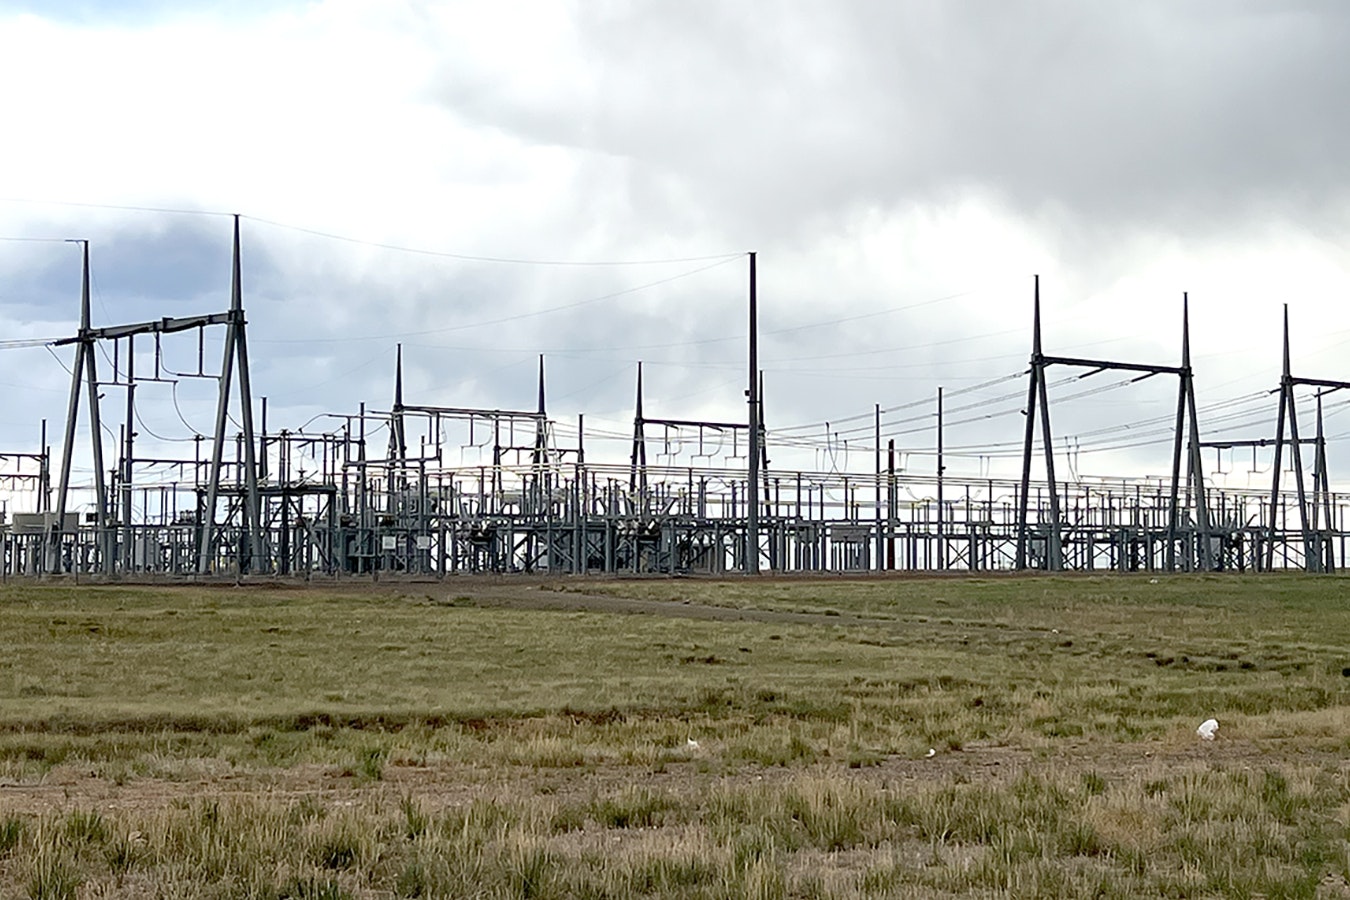 An electric substation north of Laramie, Wyoming.